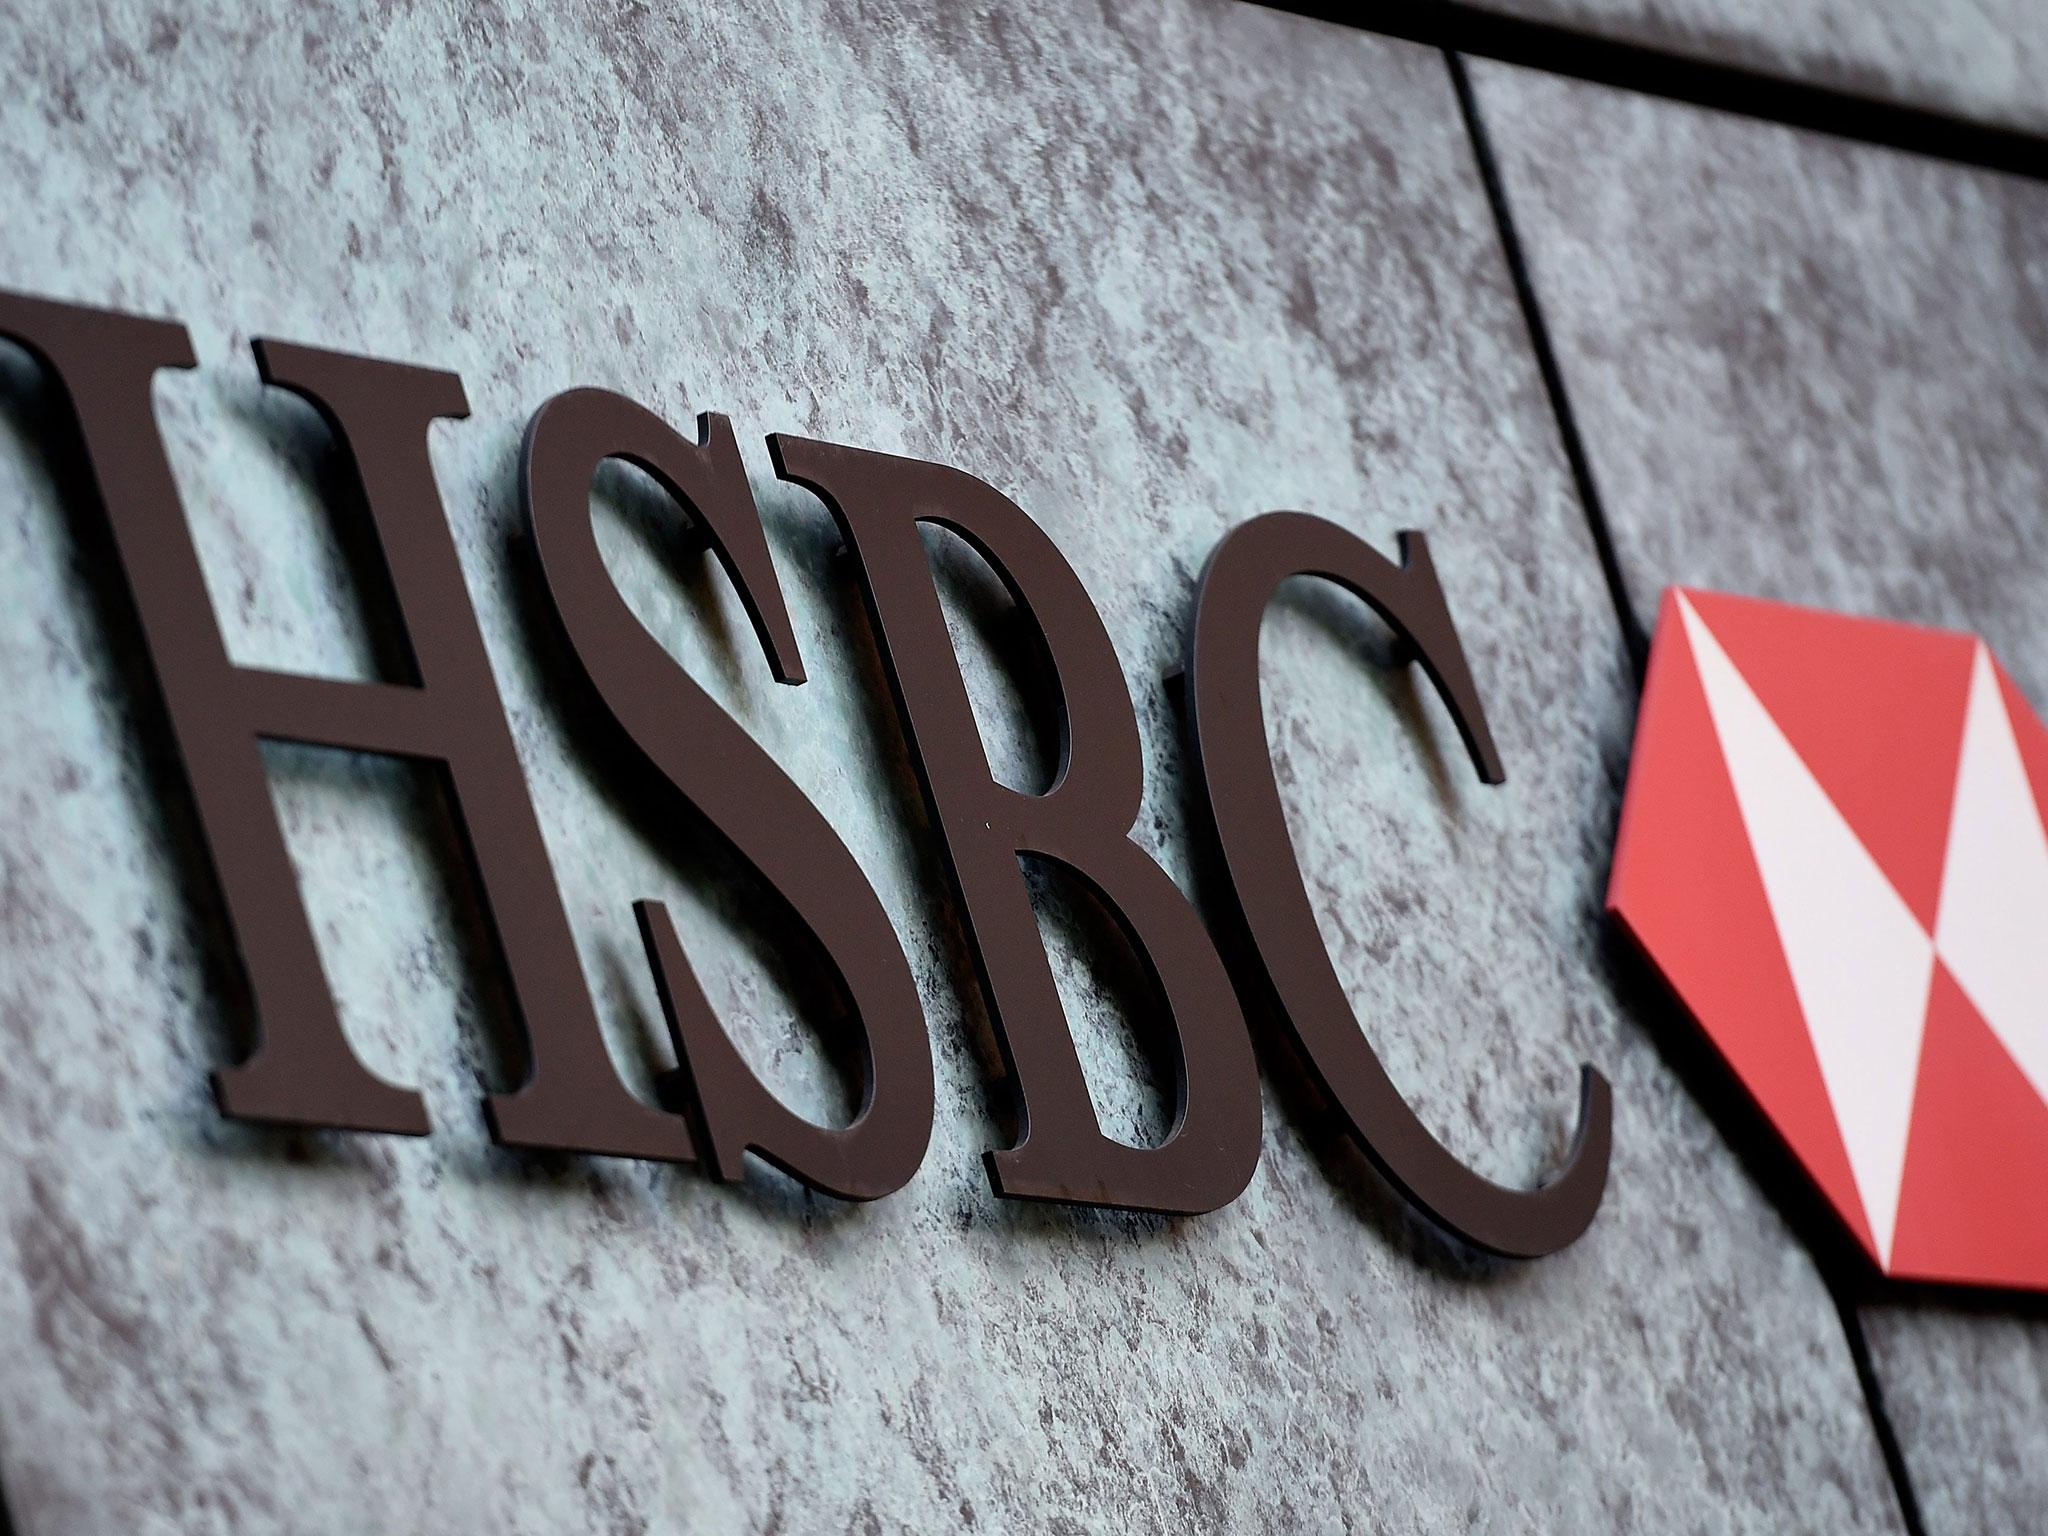 A file photograph showing a HSBC corporate logo outside a branch of the bank in central London, England, 09 February 2015